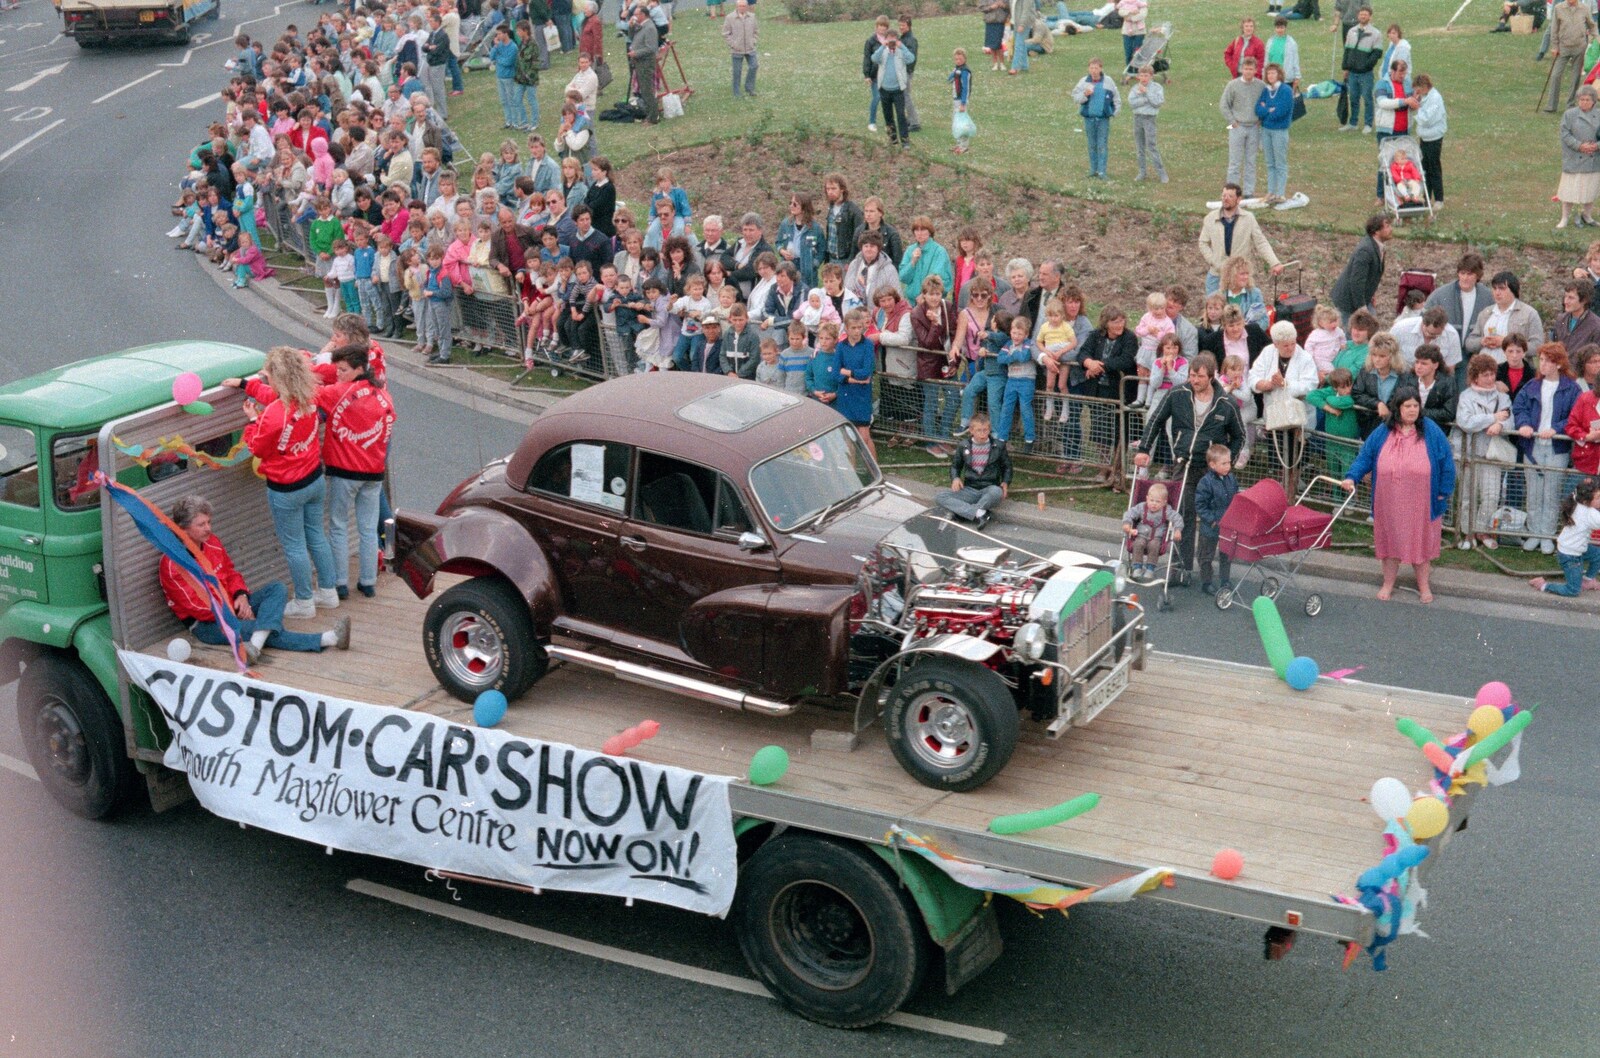 There's a custom hot-rod on a trailer from Chantal and Andy's Wedding, and the Lord Mayor's Parade, Plymouth - 20th May 1987